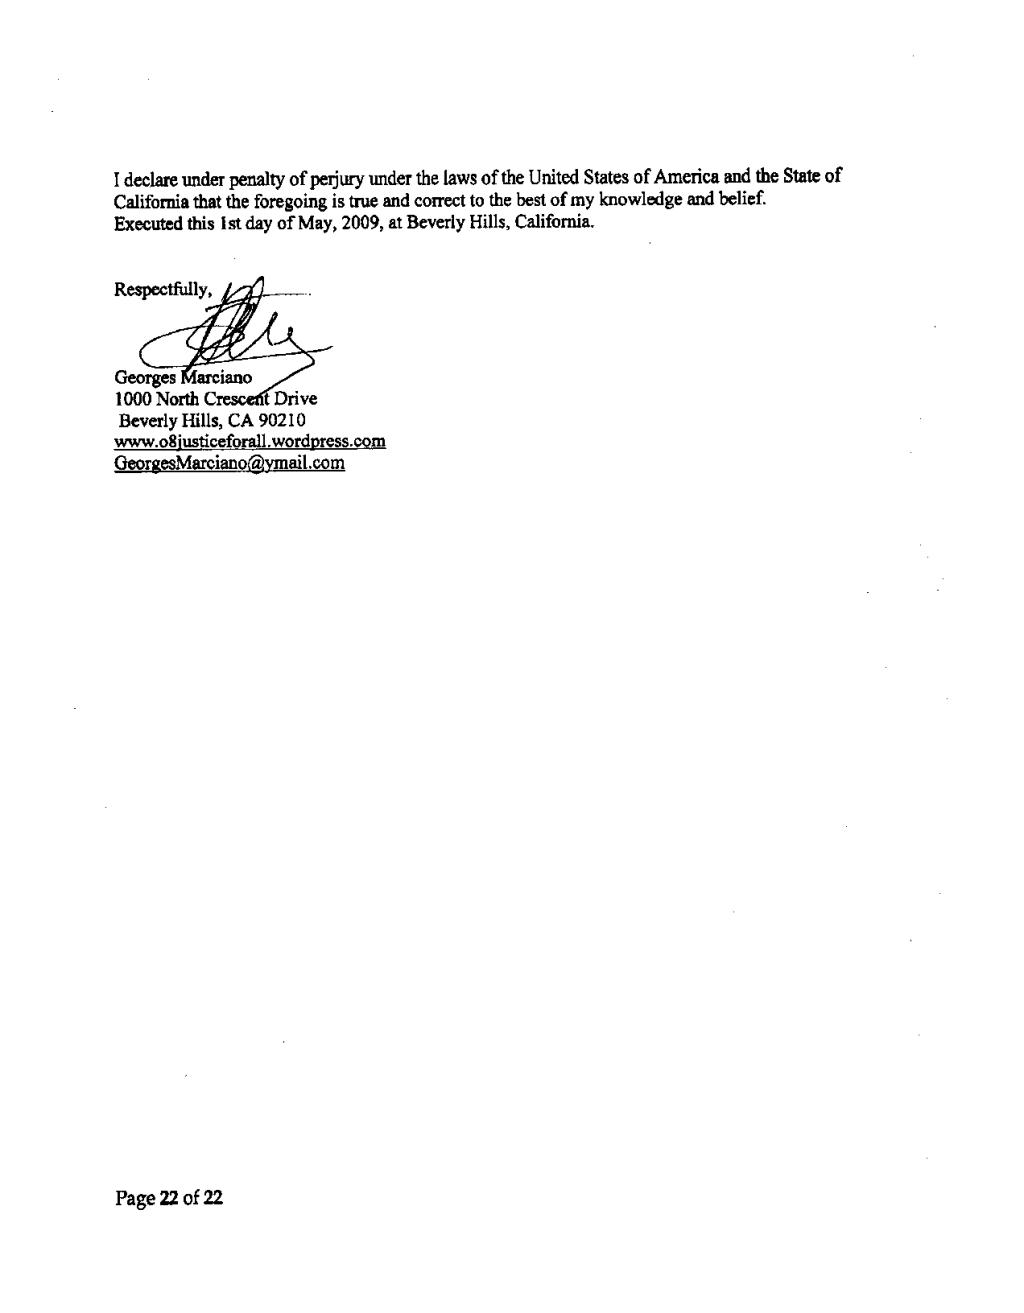 full complaint judge white for federal with exhibits_1_page51